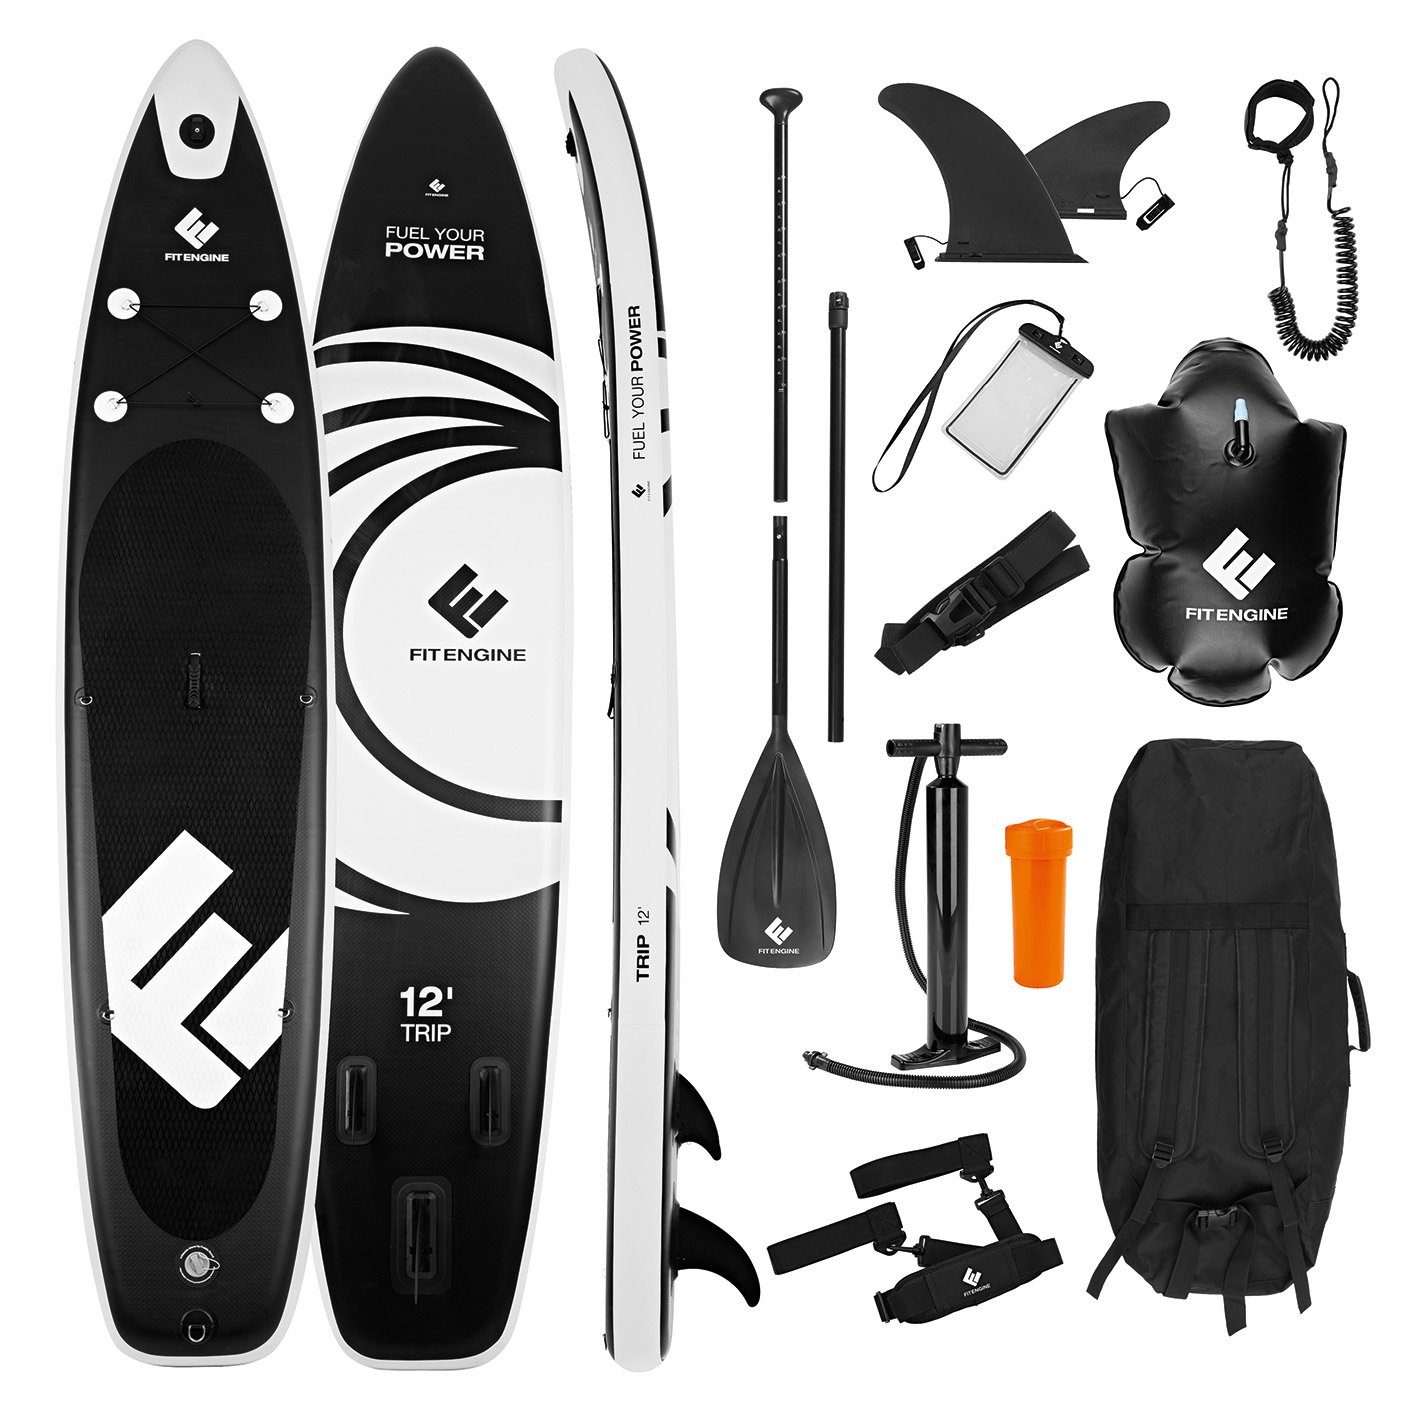 365cm FitEngine Paddle, 160kg Inflatable aufblasbar extra Groß SUP-Board Stand Up stabil